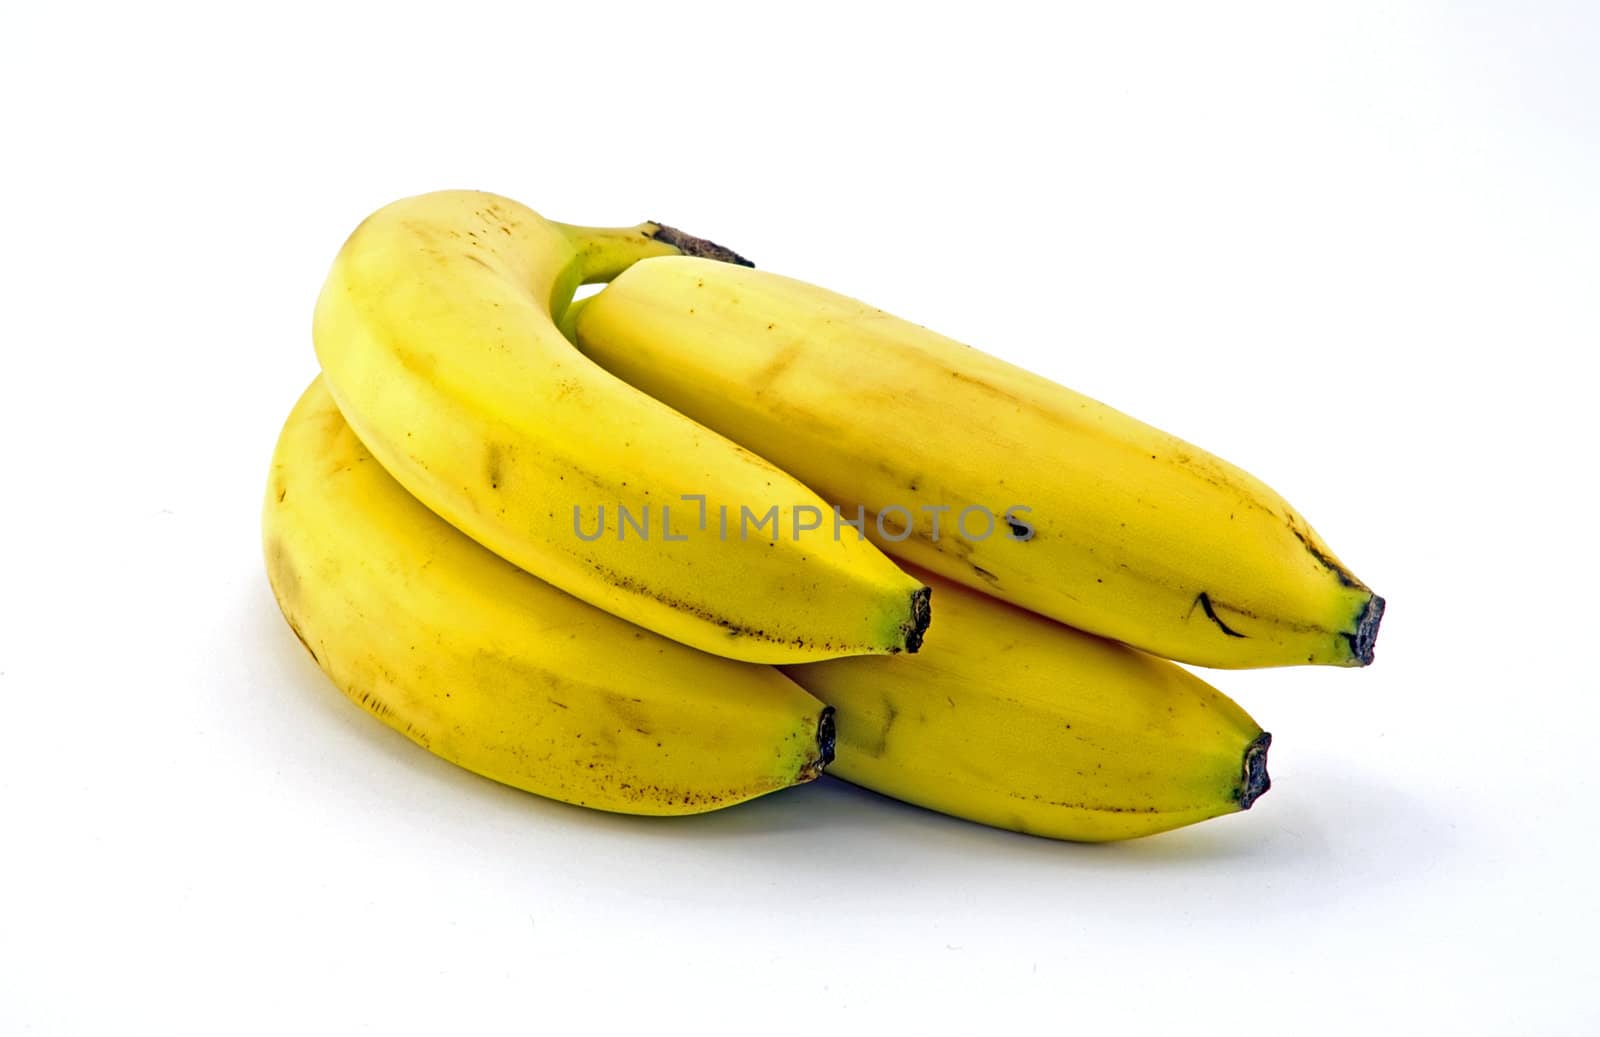 A cluster of bananas on white background